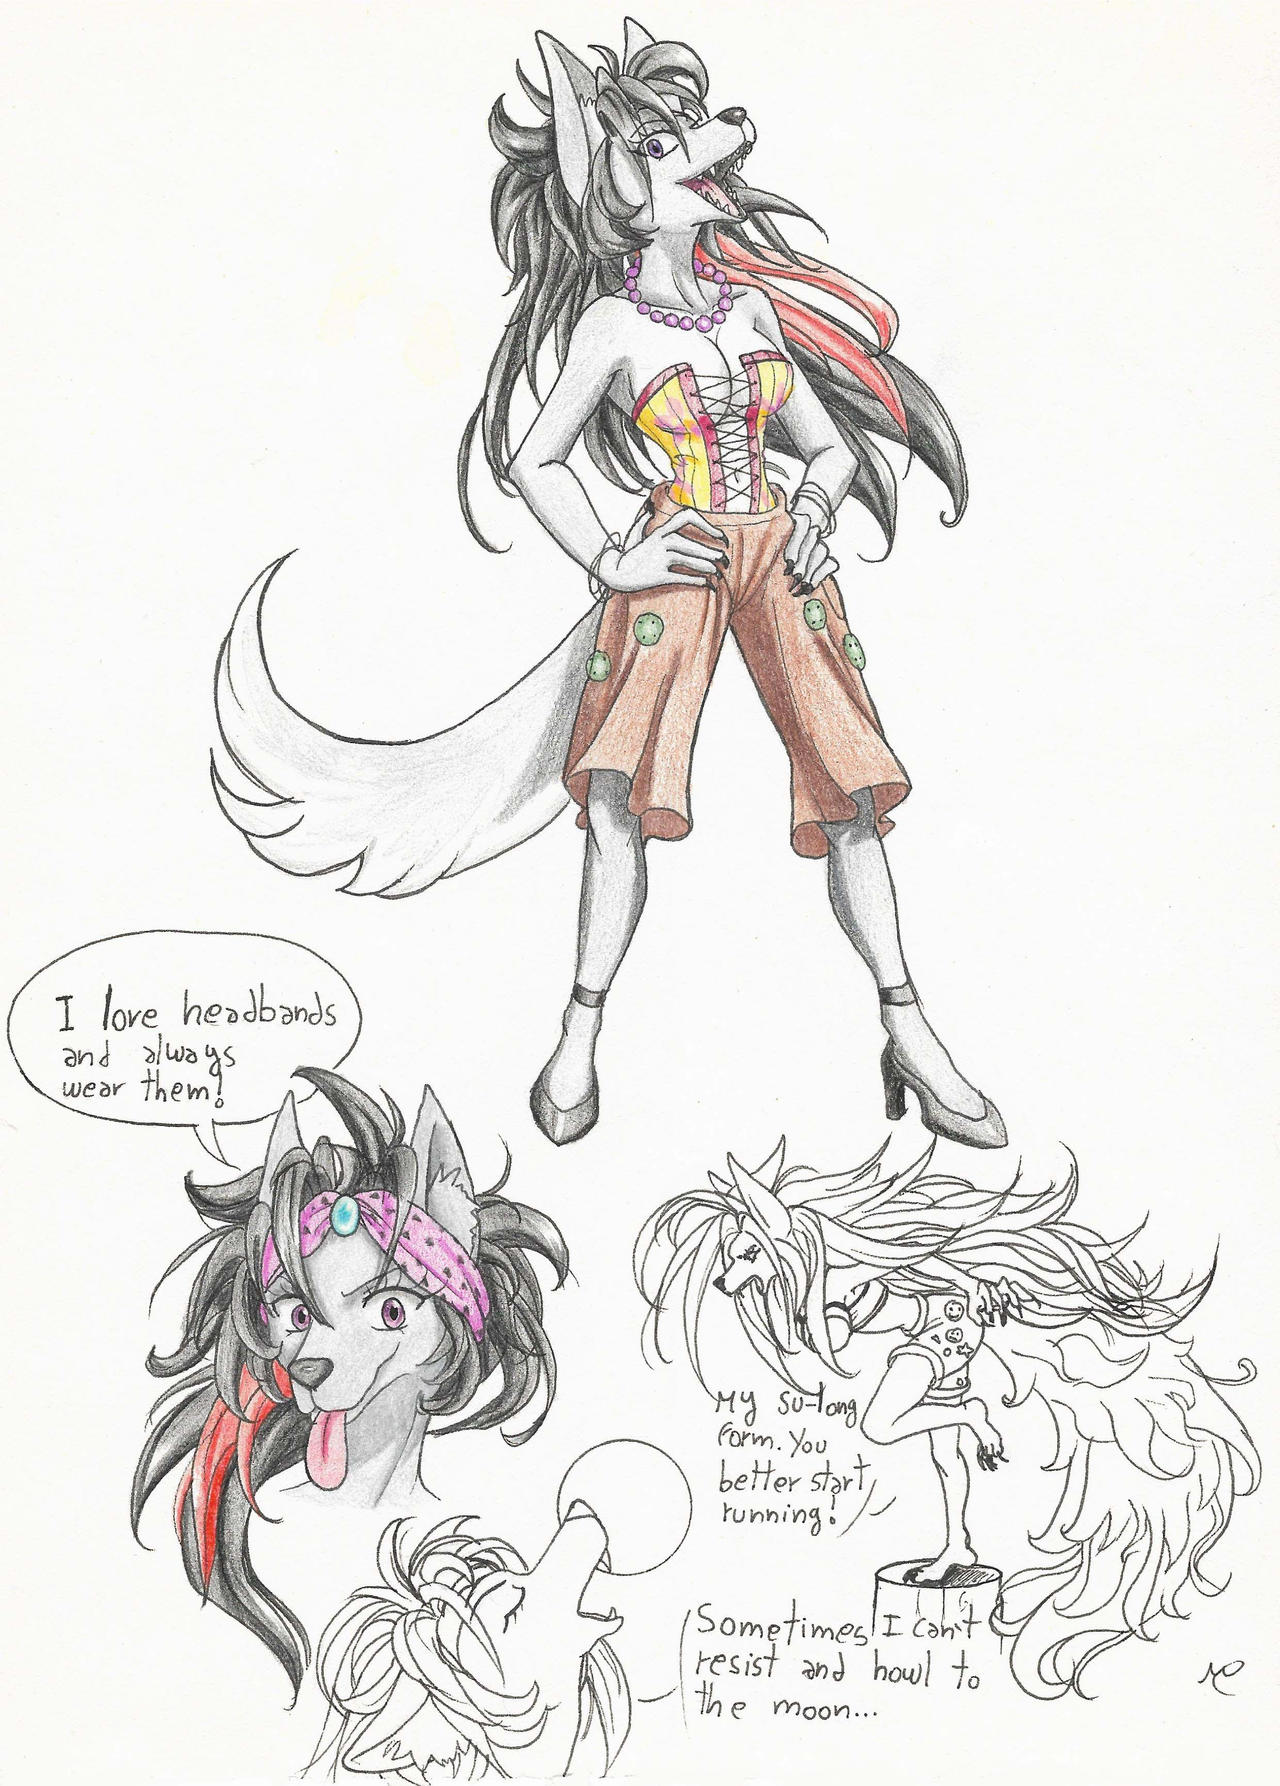 One Piece Oc May The Wolf Profile Sheet By Fluffy Foxlady On Deviantart